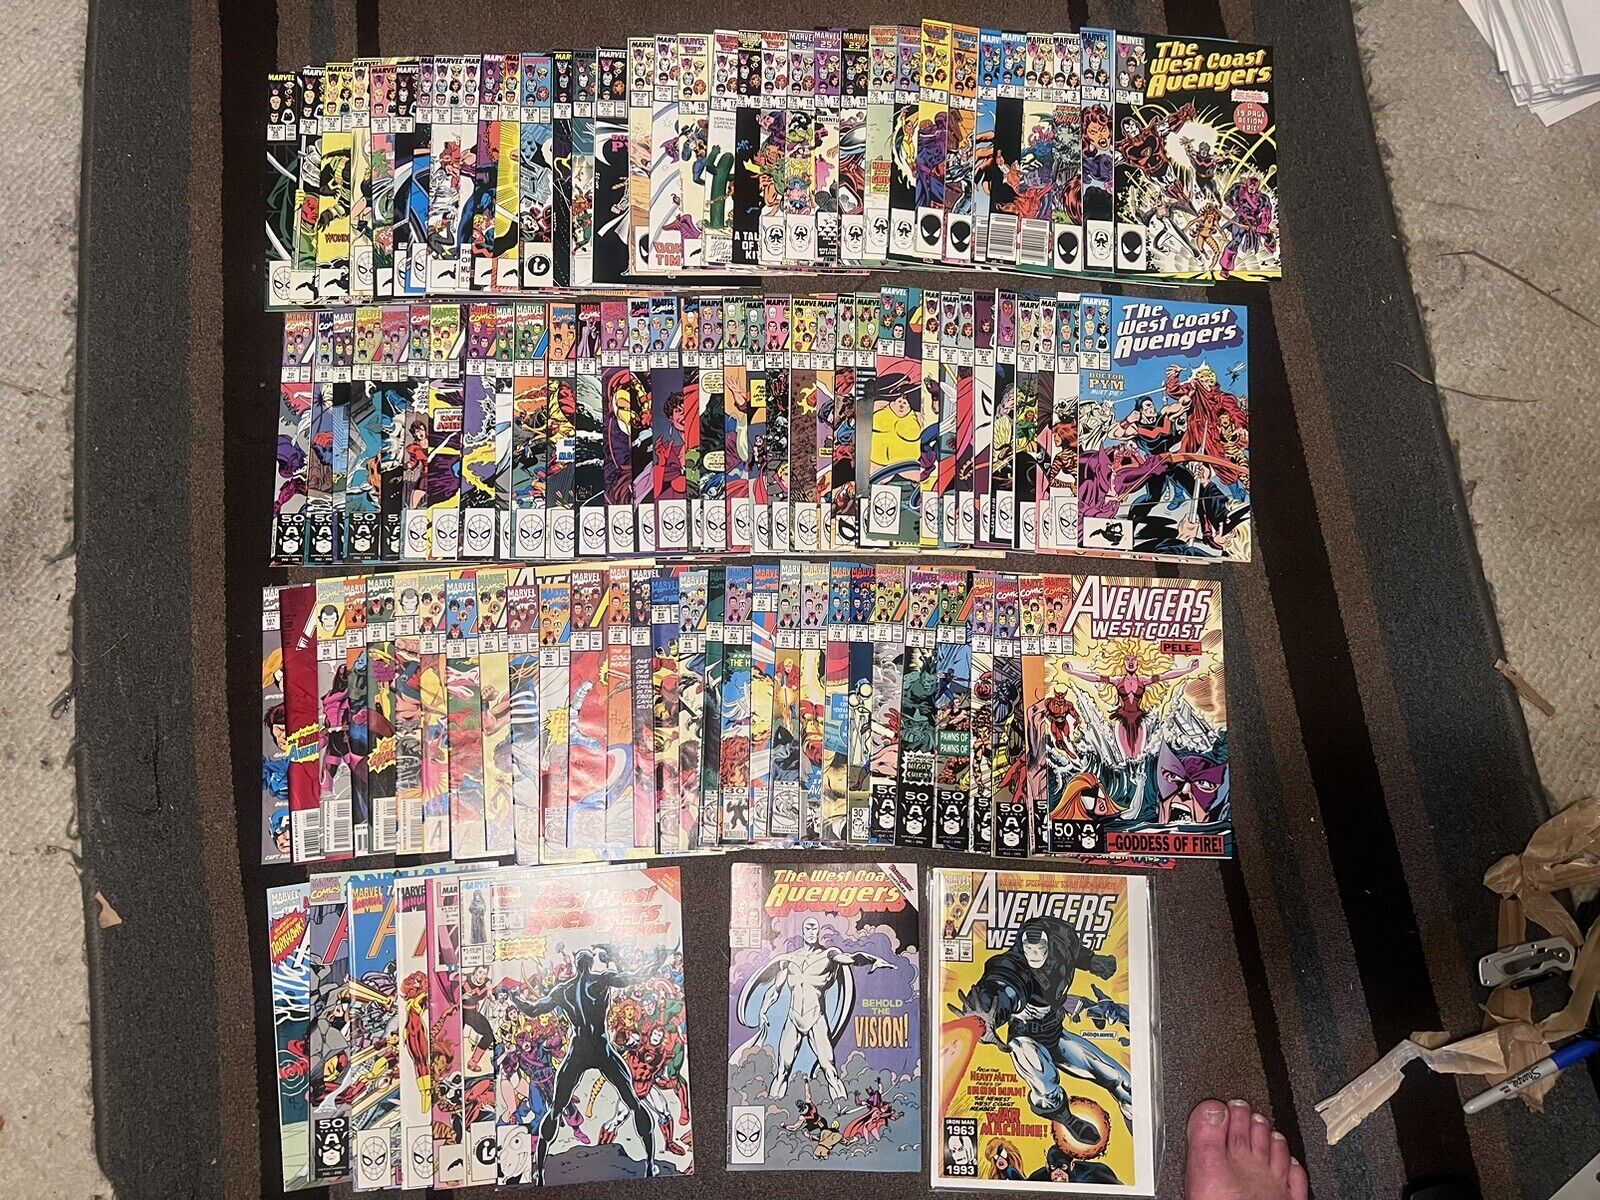 WEST COAST AVENGERS ( Marvel 1985 ) Complete Series #1-101 + Annuals All NM 9.0 